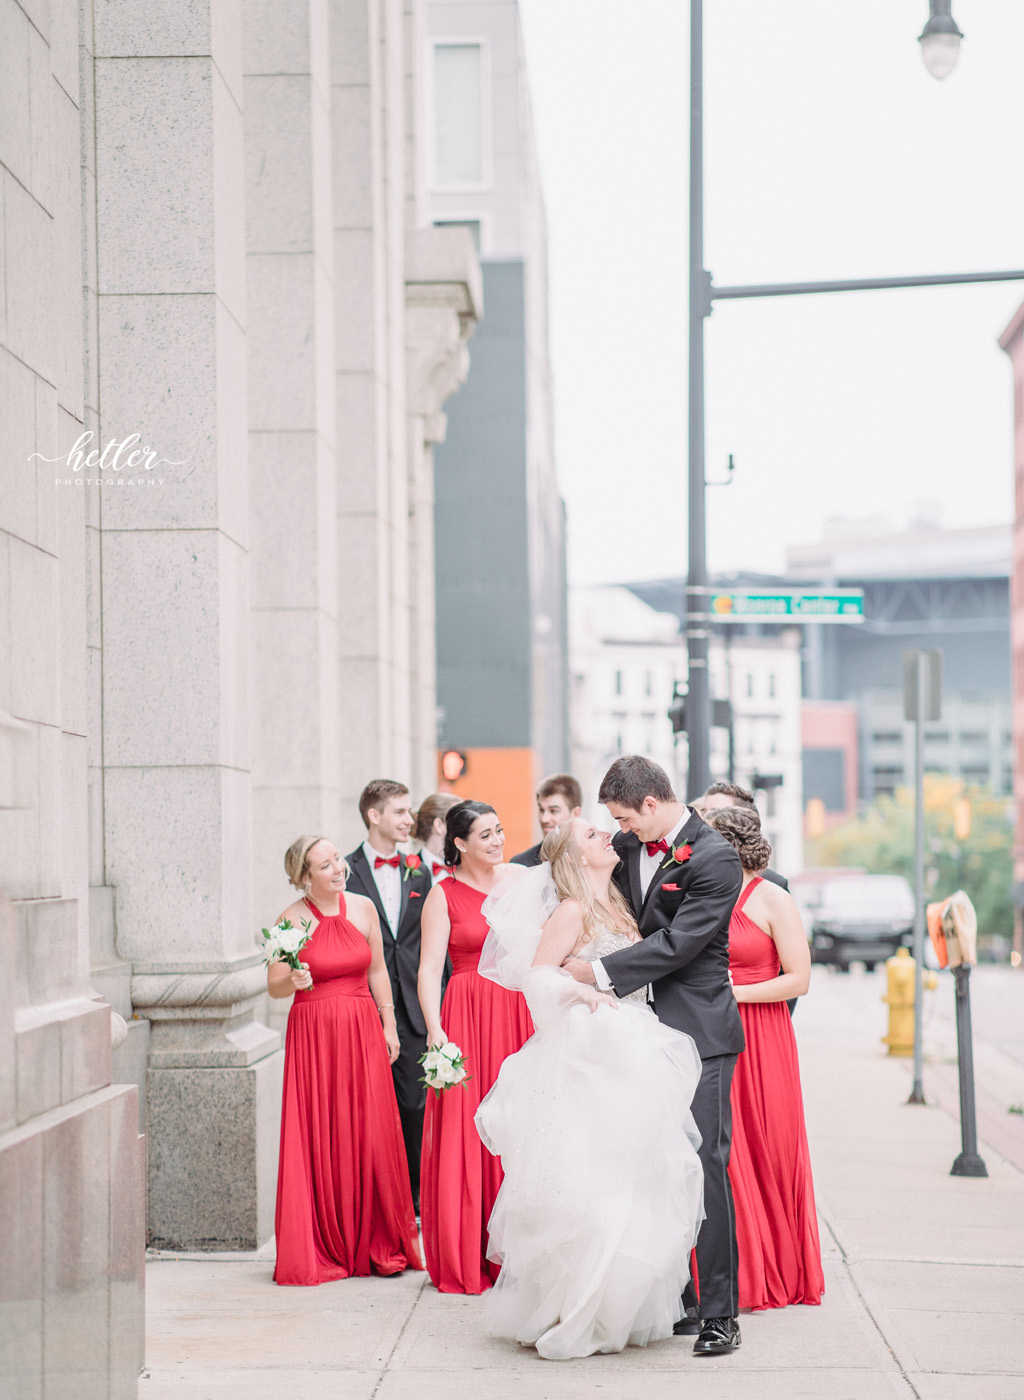 Downtown Grand Rapids CityFlats wedding with bridal party